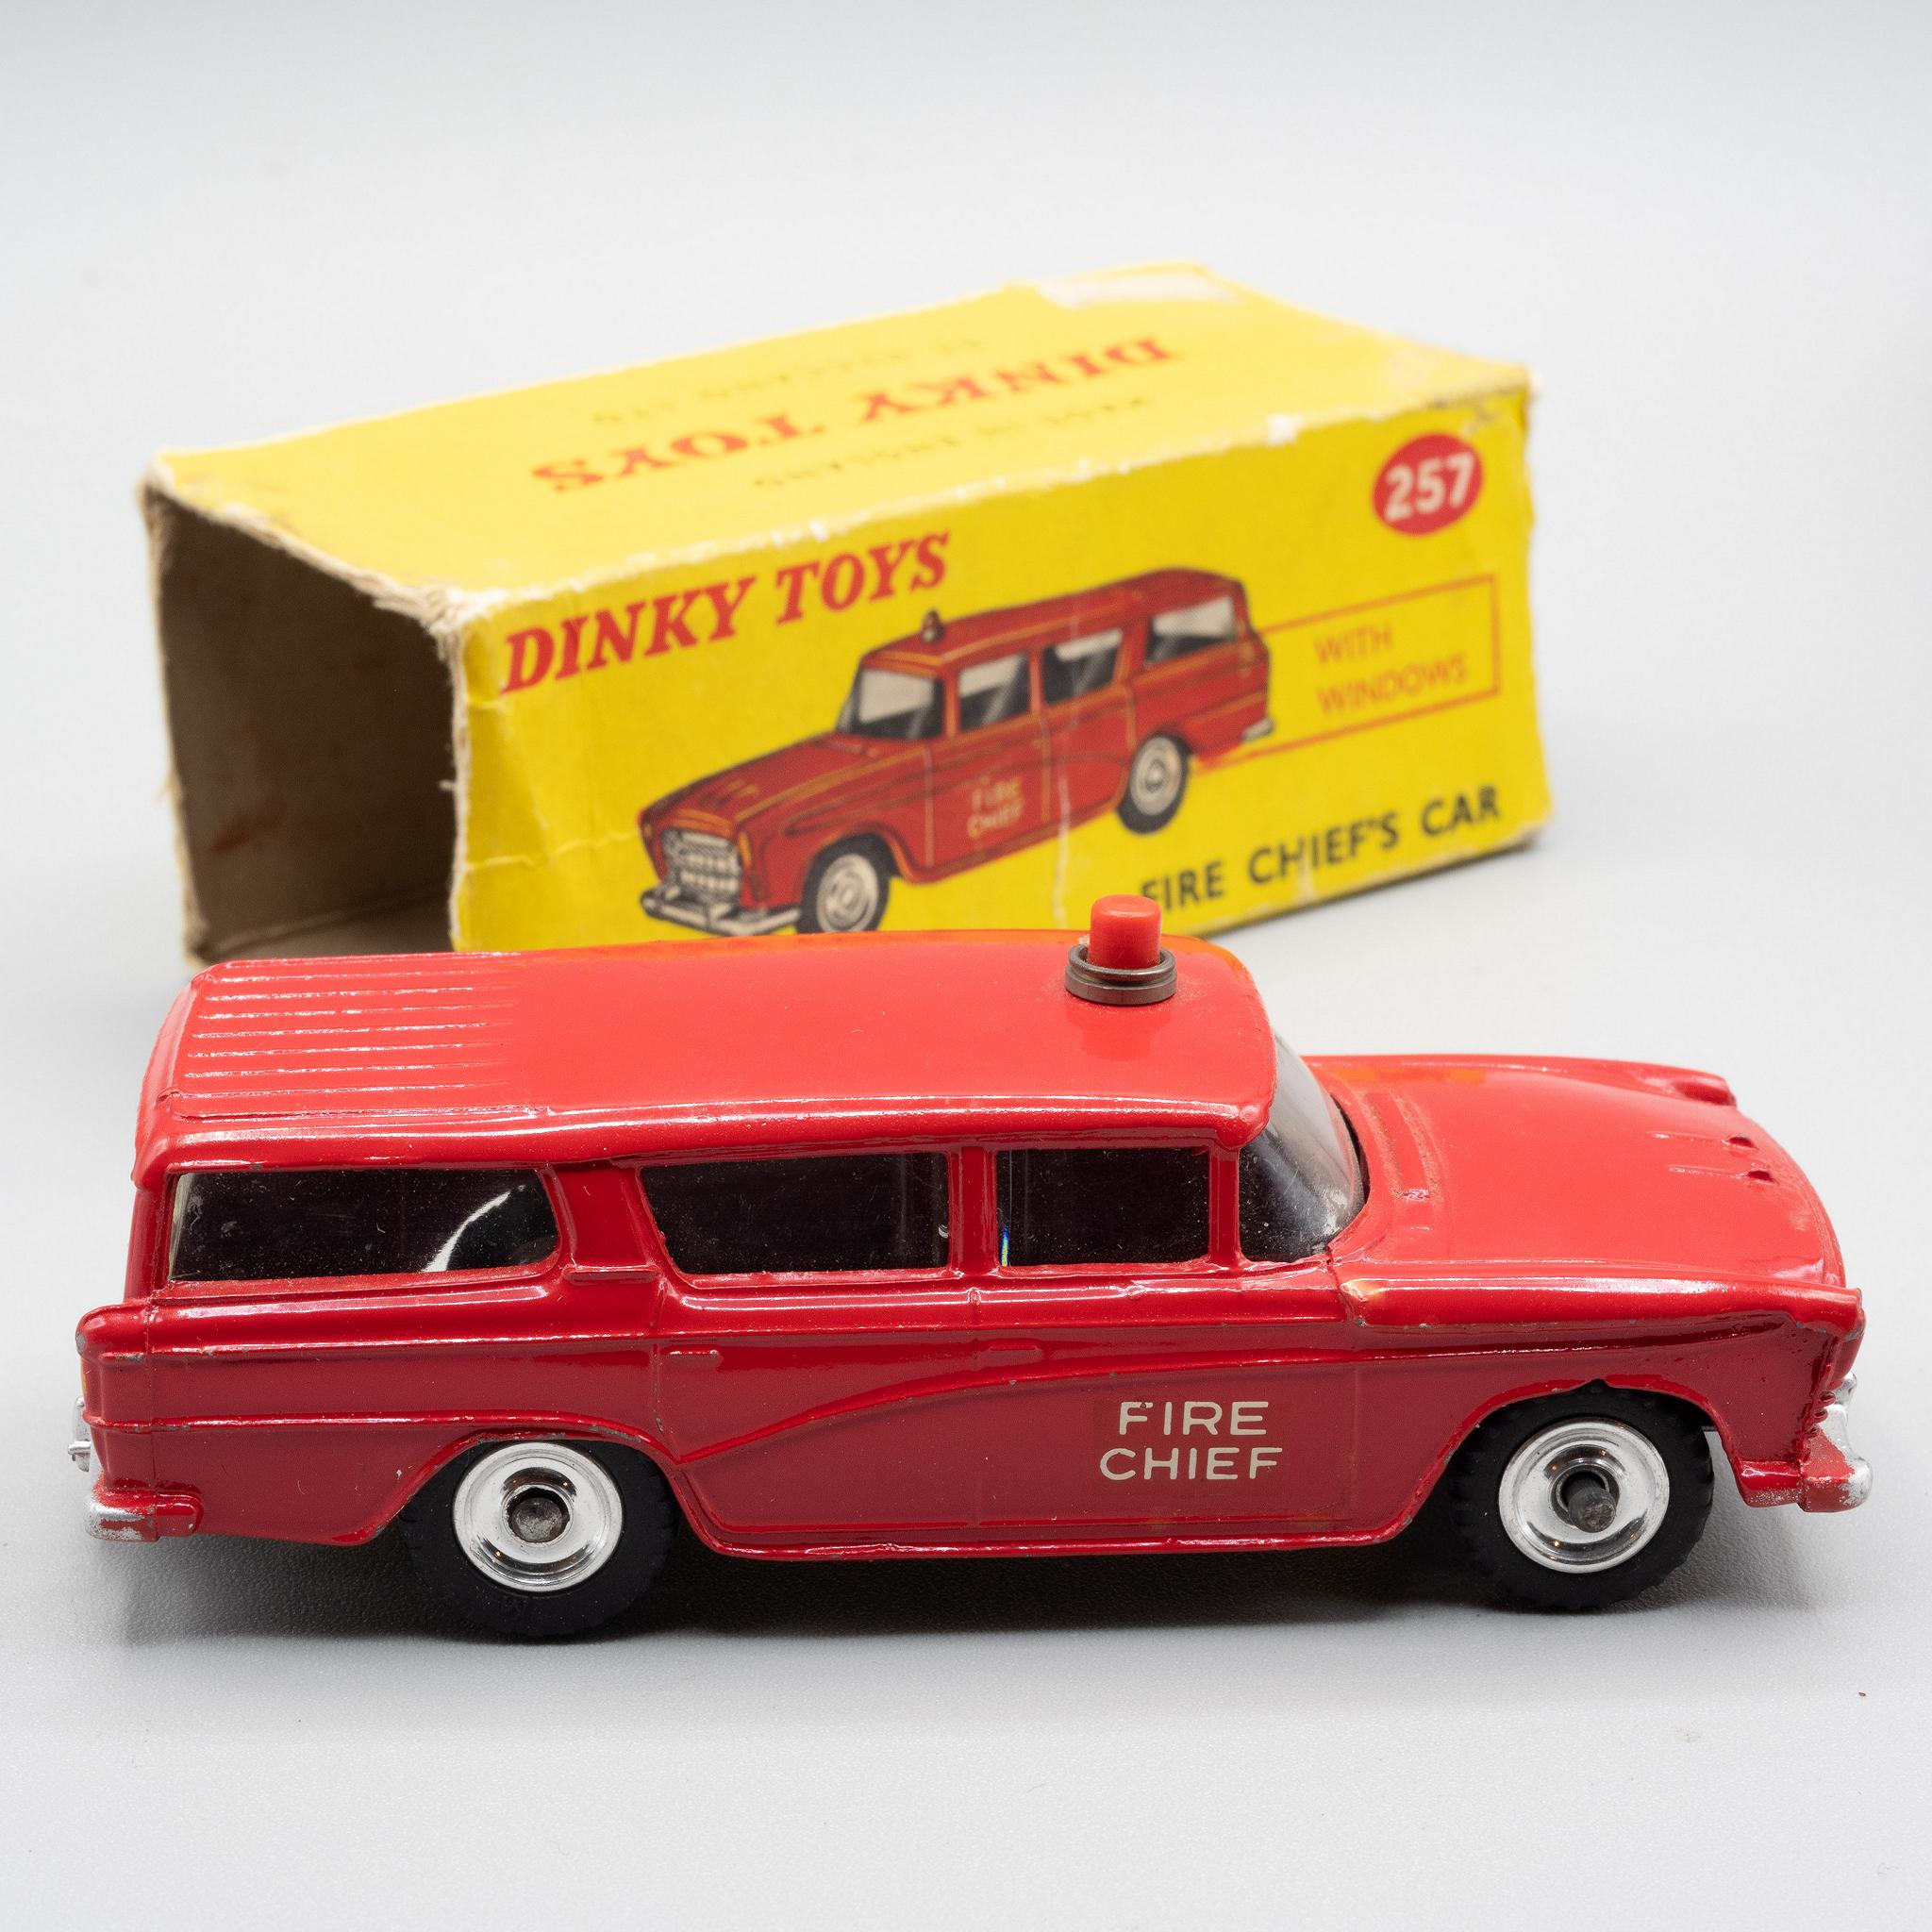 Dinky+Toys+Nash+Rambler+Fire+Chief+Car+257+with+Partial+Box picture 1